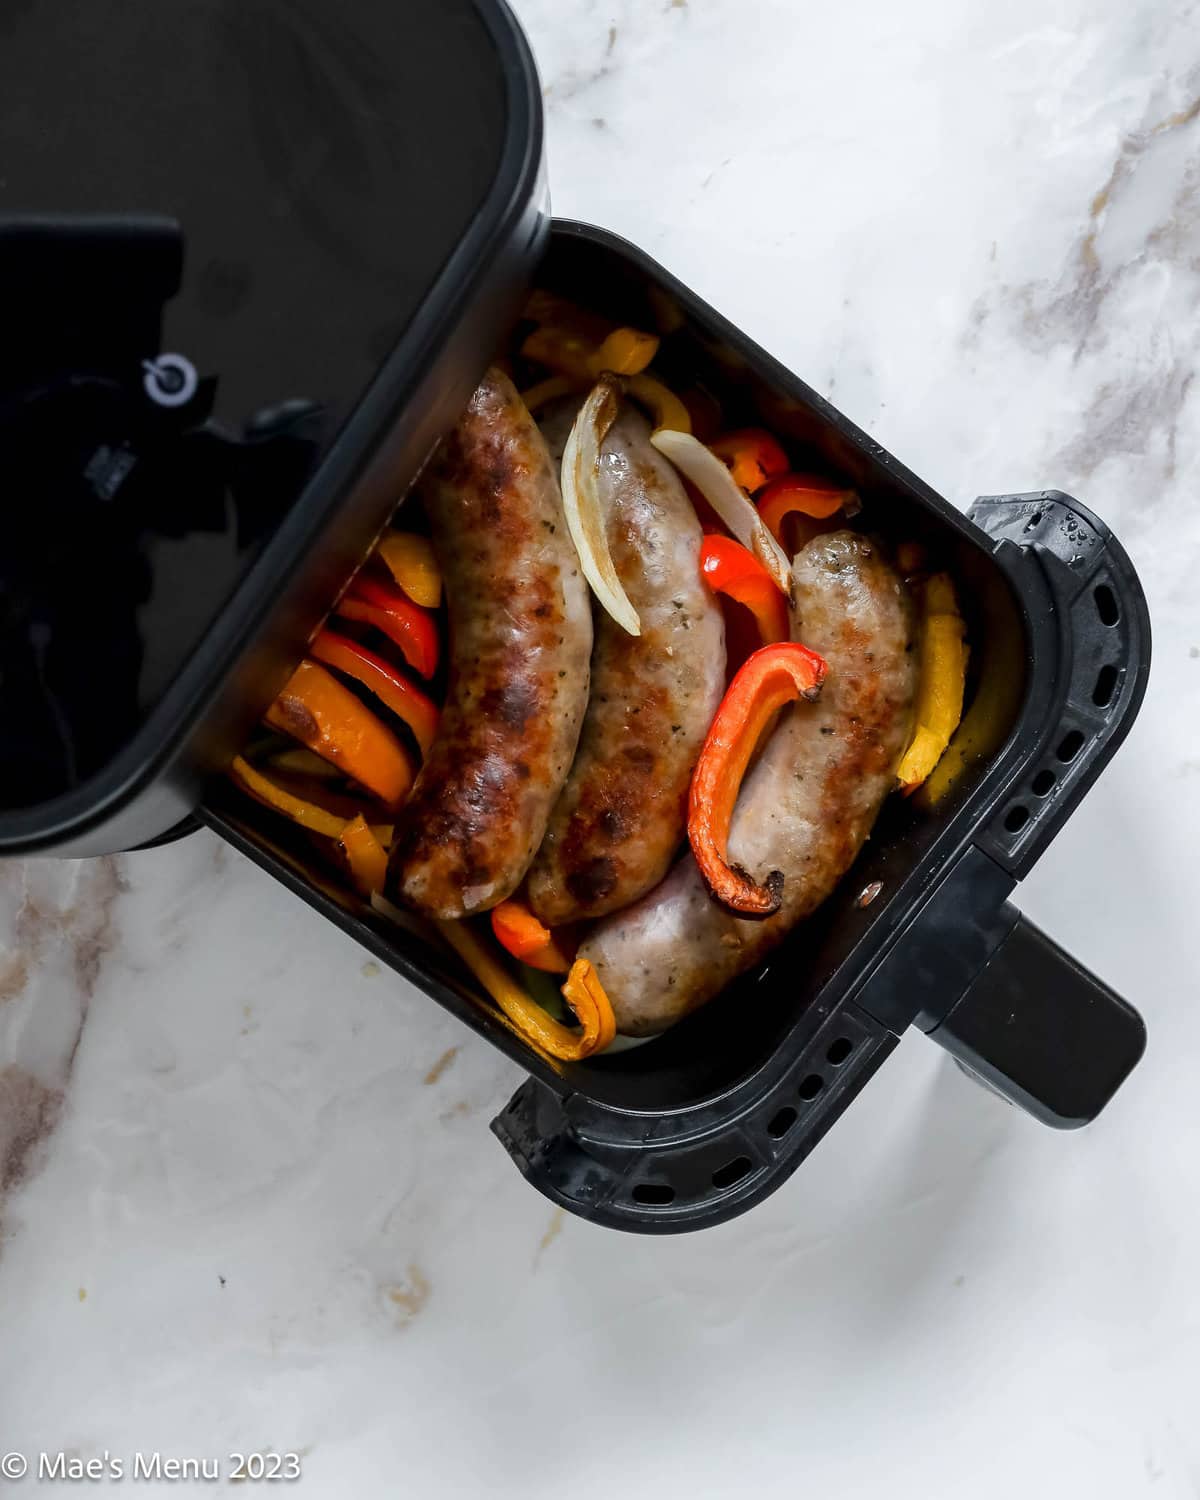 Cooked Italian sausage and peppers in the air fryer basket.